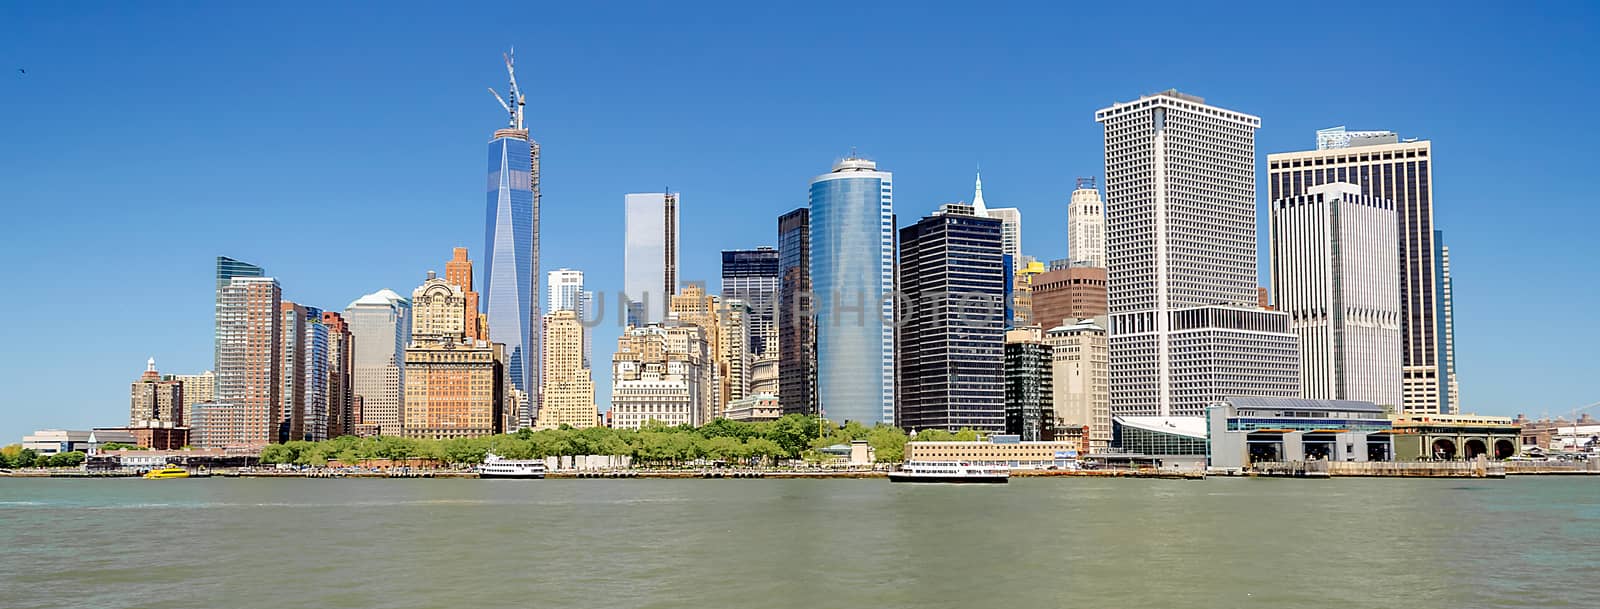 View of modern skyscrapers in lower Manhattan, New York City, USA. Concept for business, finance, real estate